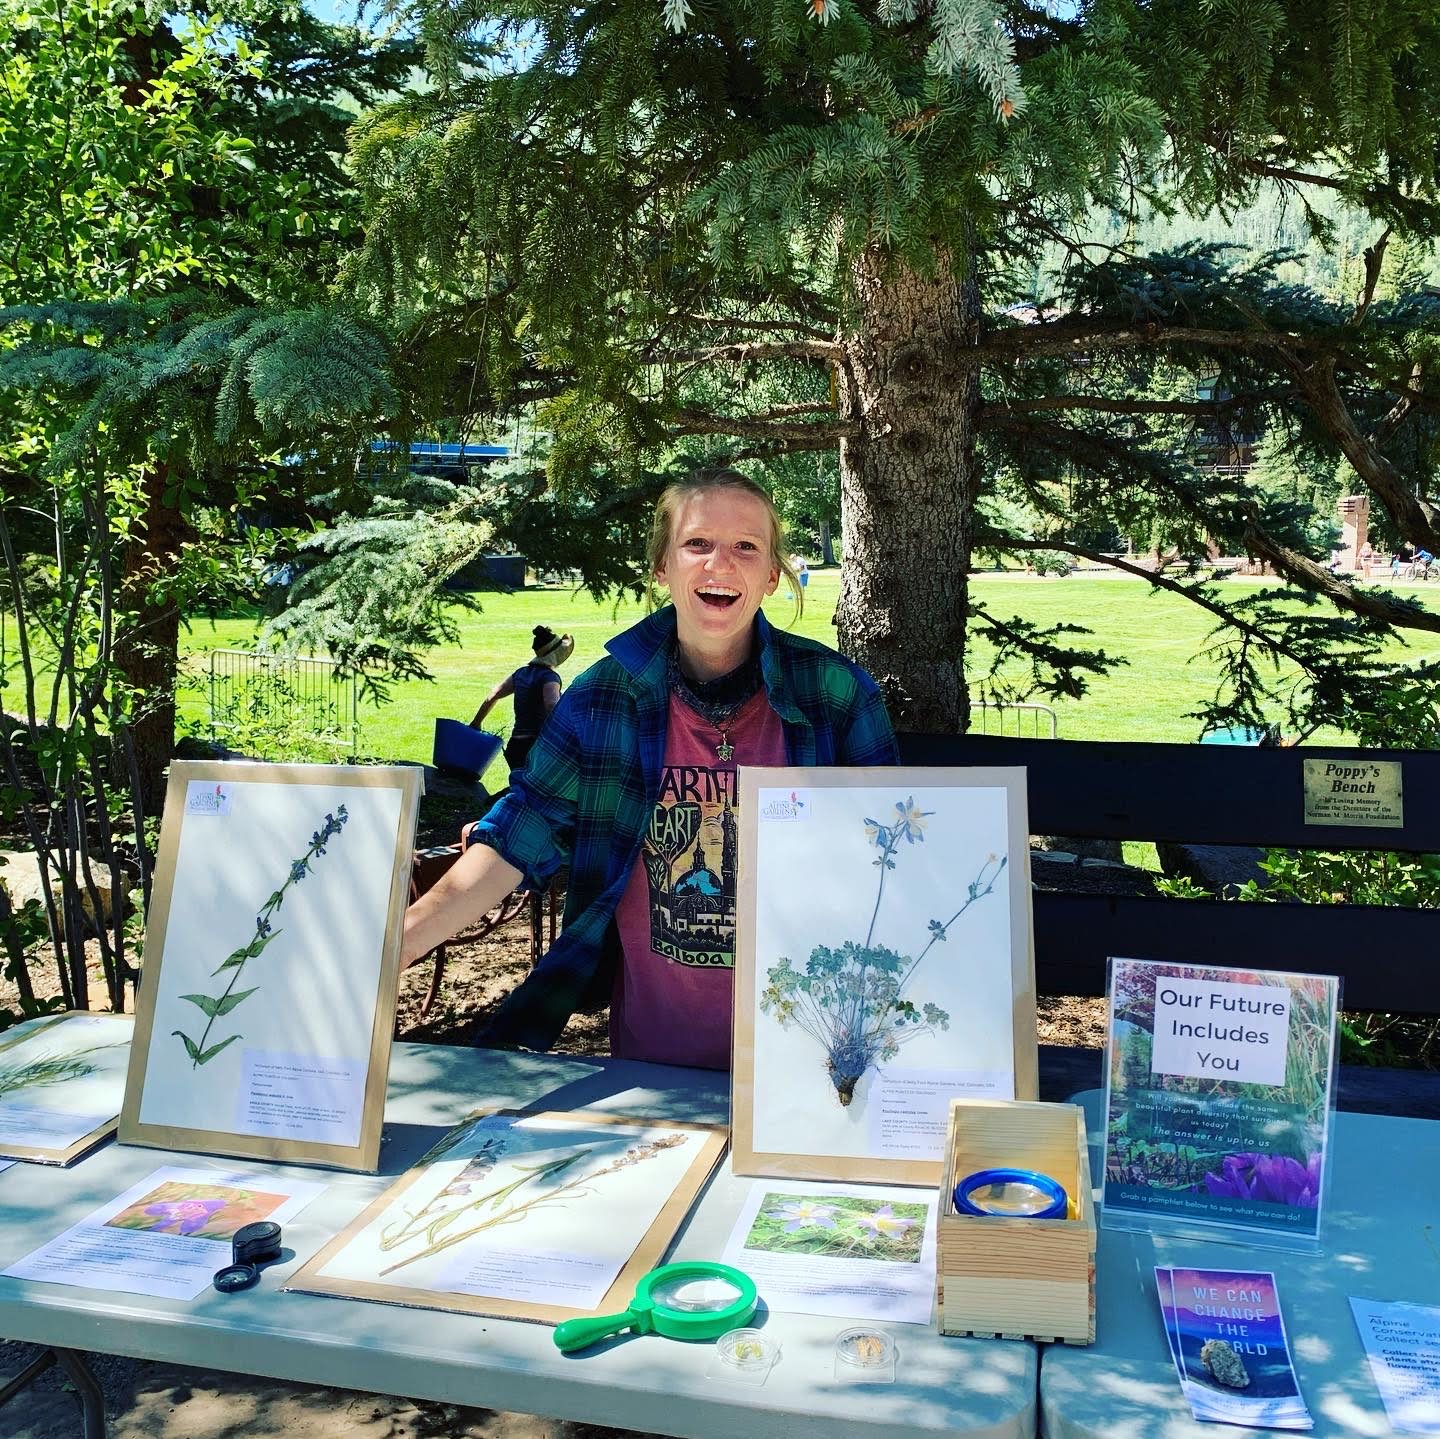 Tenaya, 2020 Education Intern, at the Conservation Table in the Gardens.